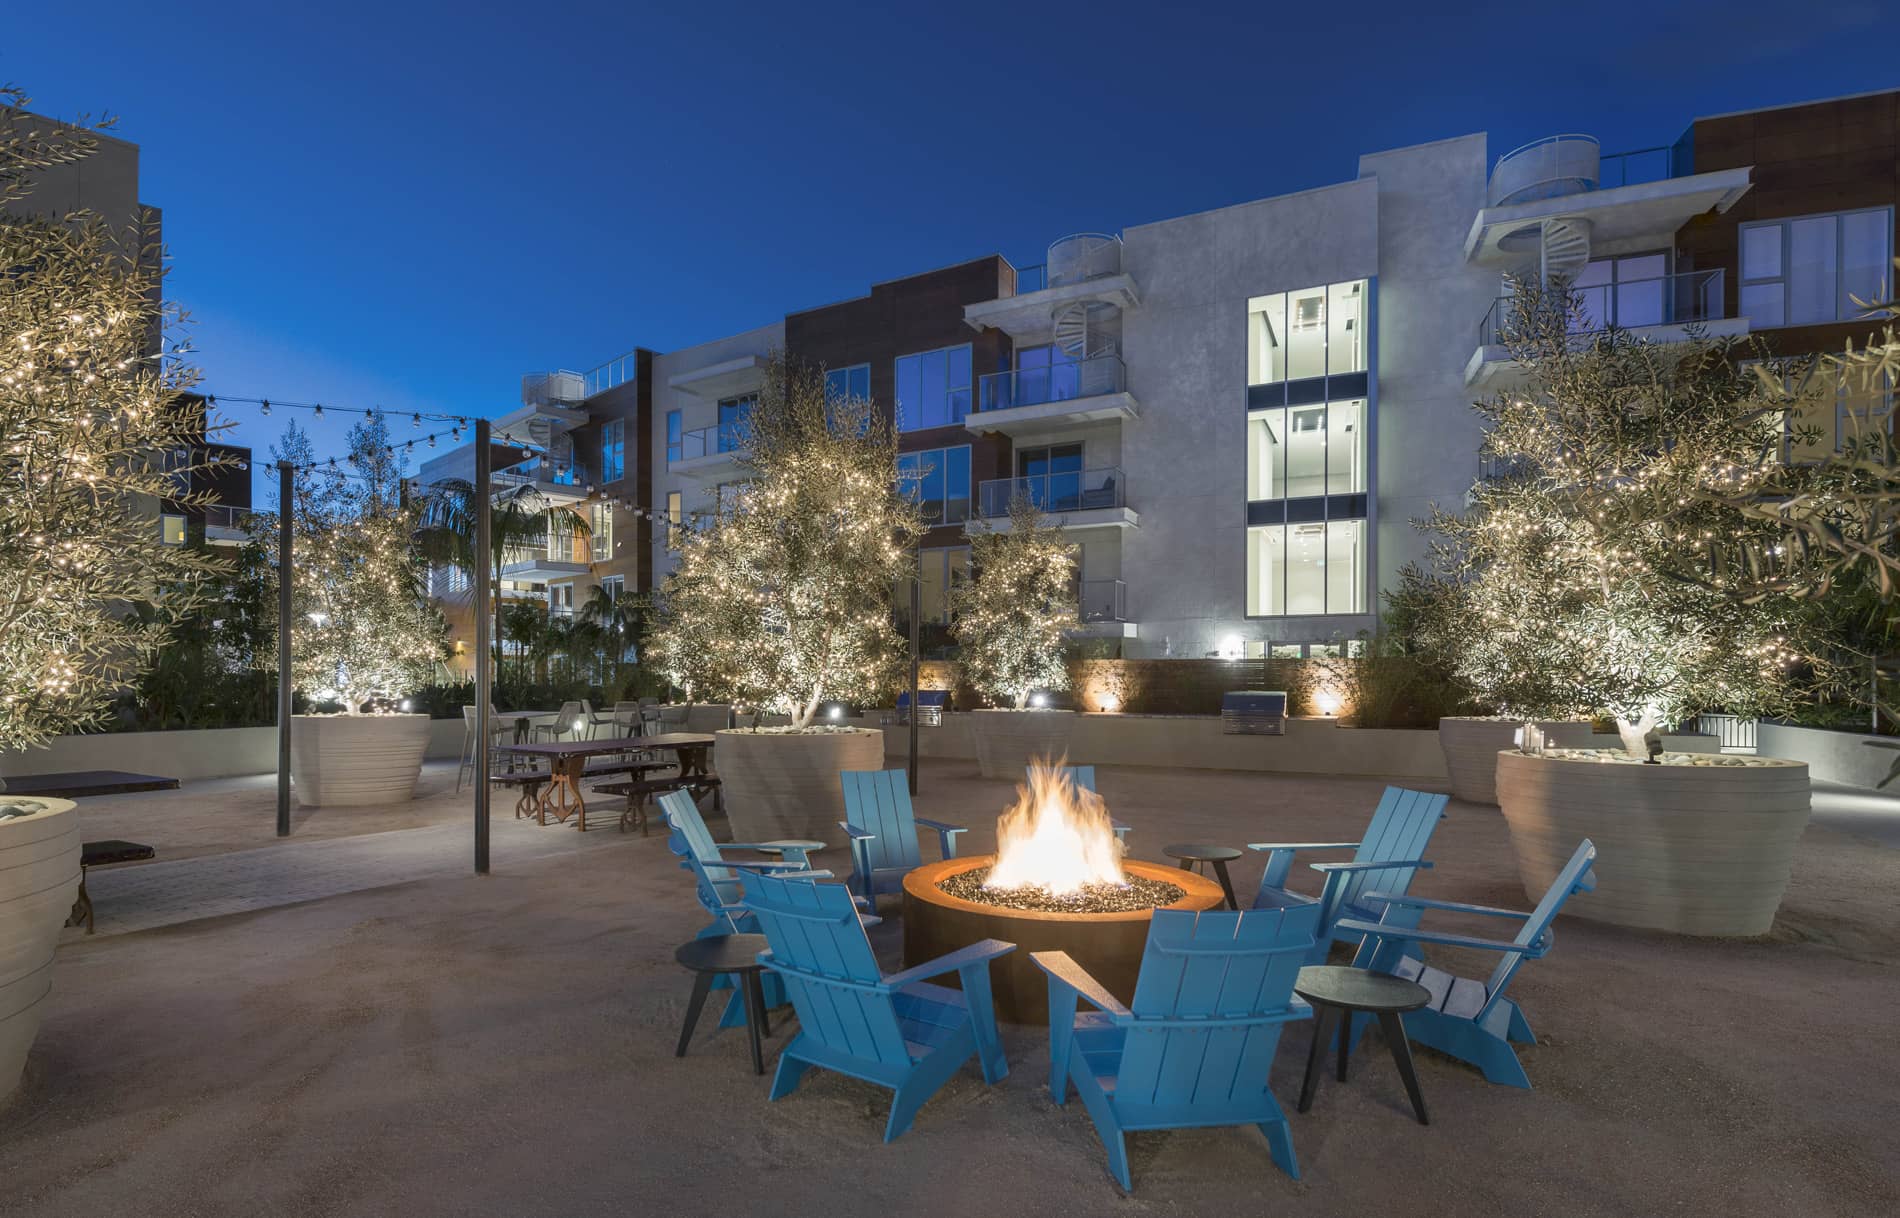 The Residences at Pacific City Courtyard and Fire Pit